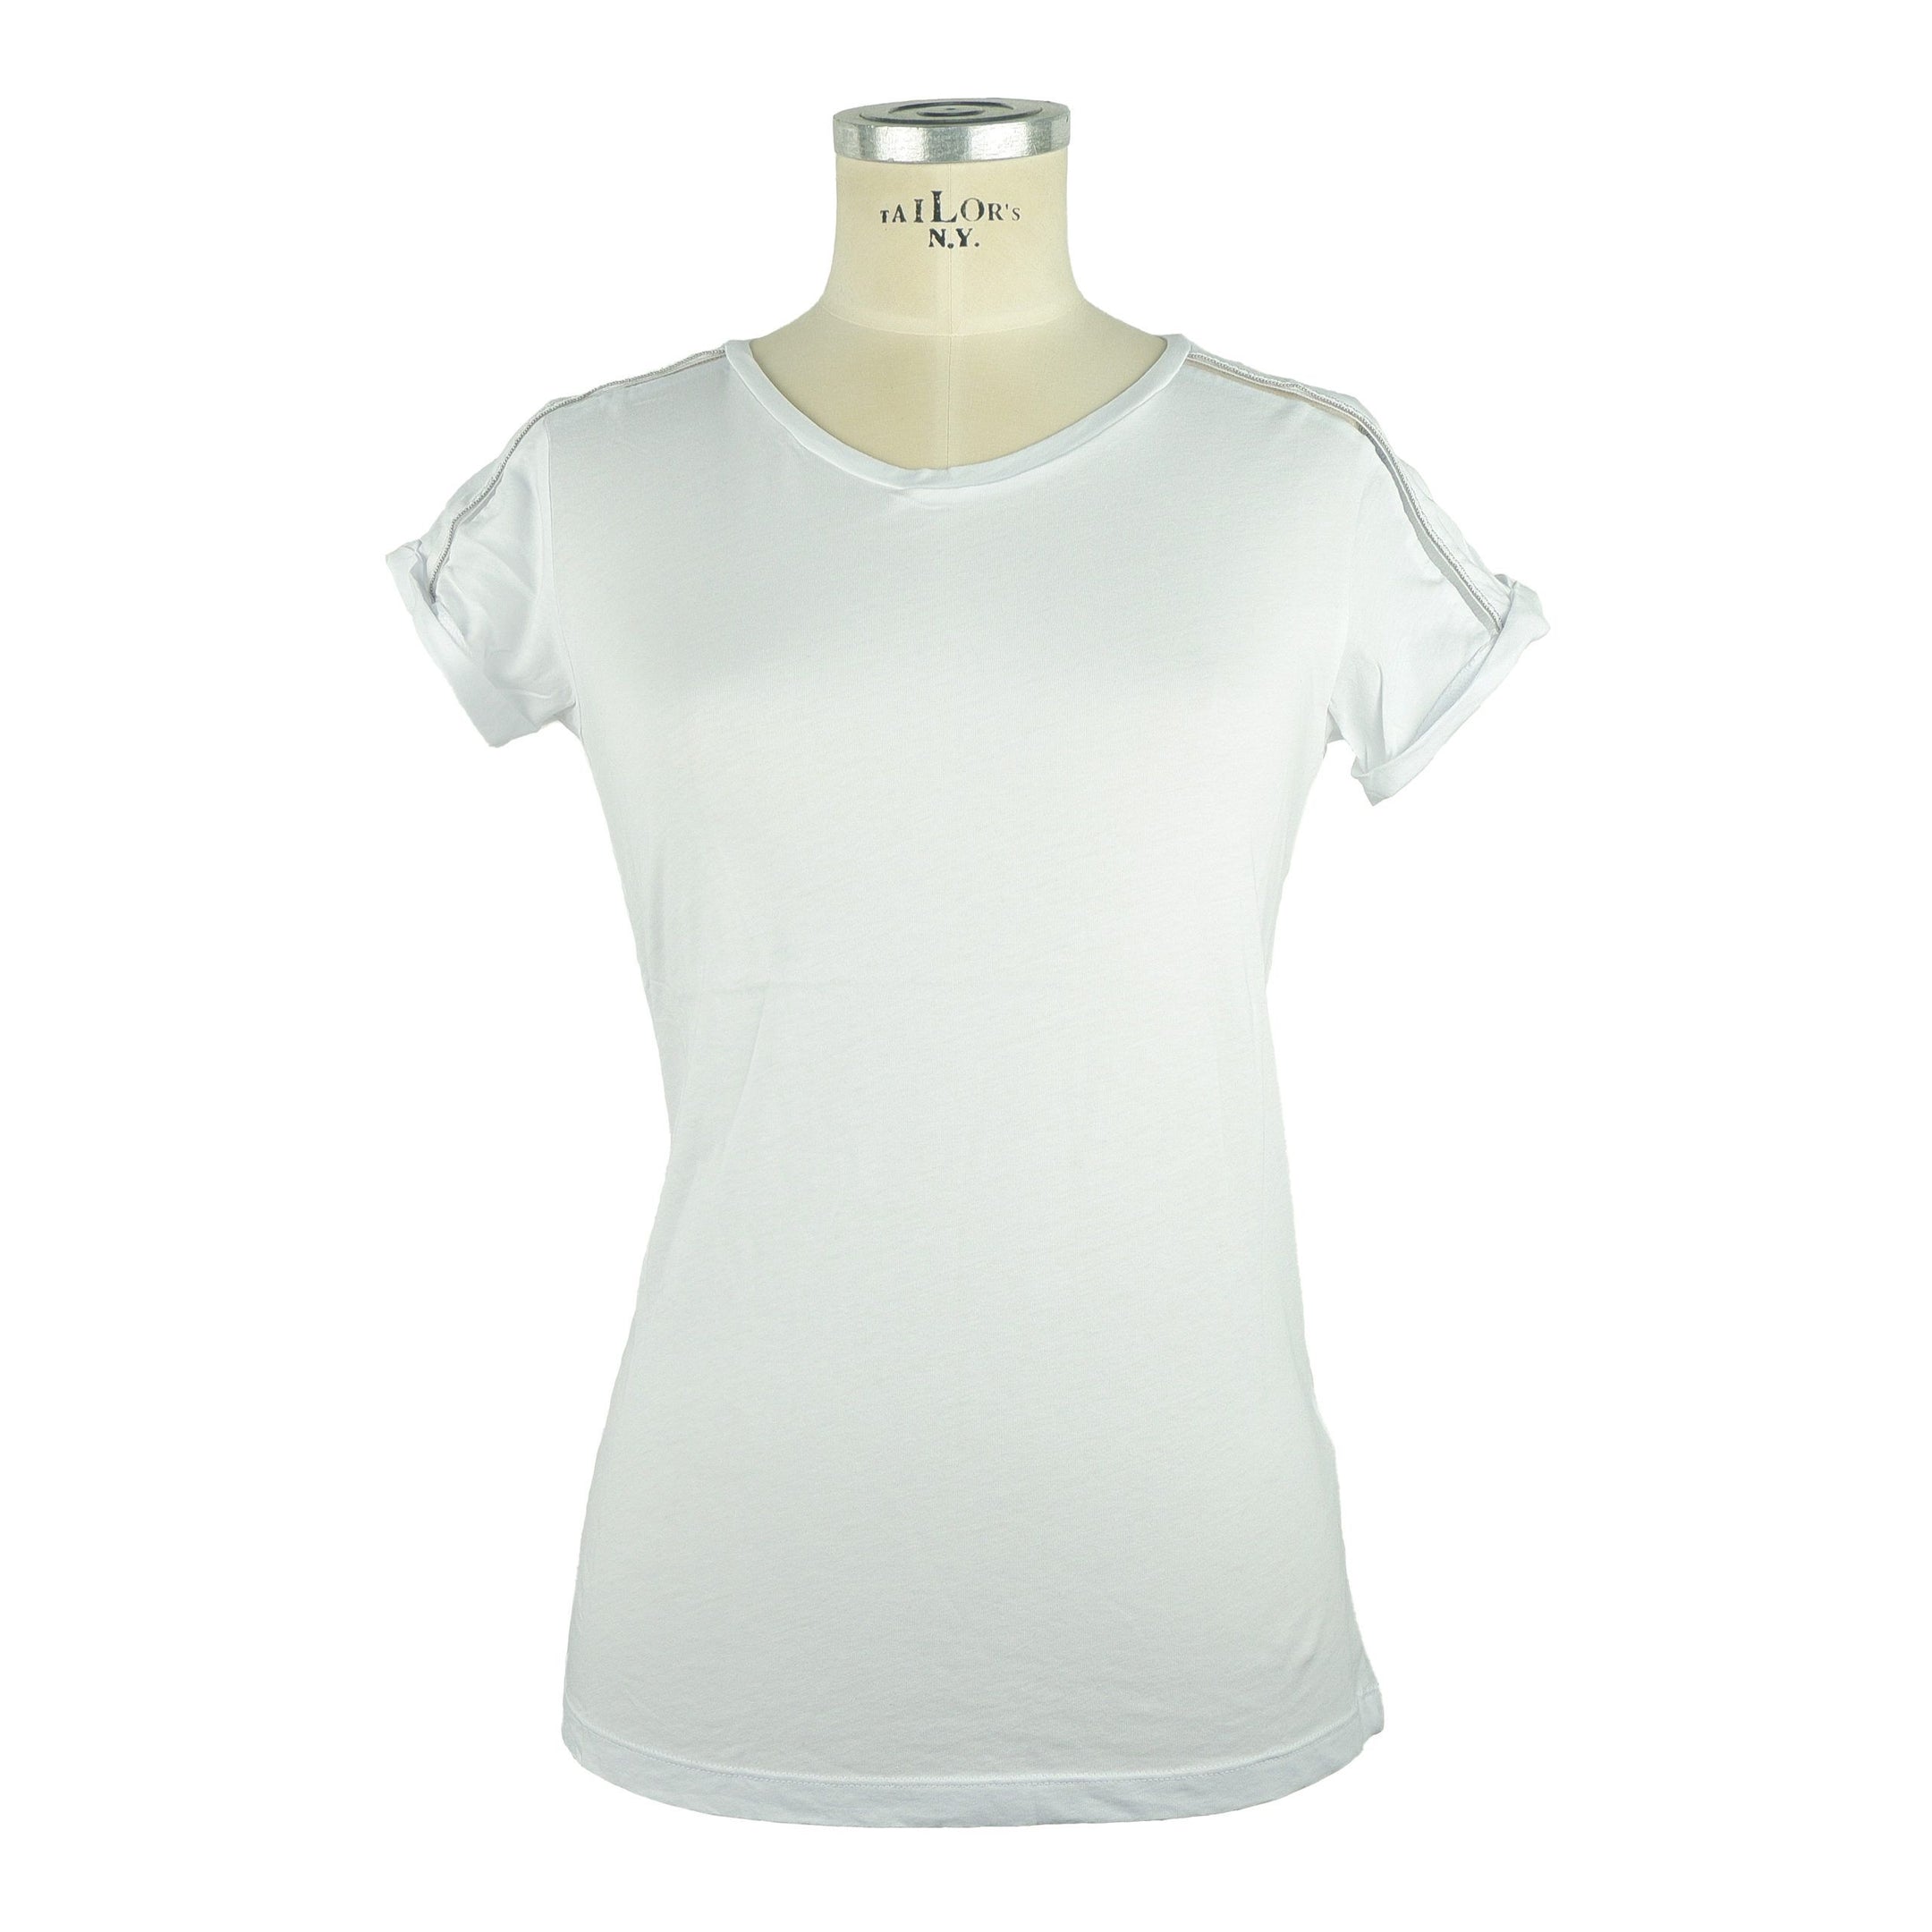 Chic Cotton-Linen Crew Neck Top with Embellishments